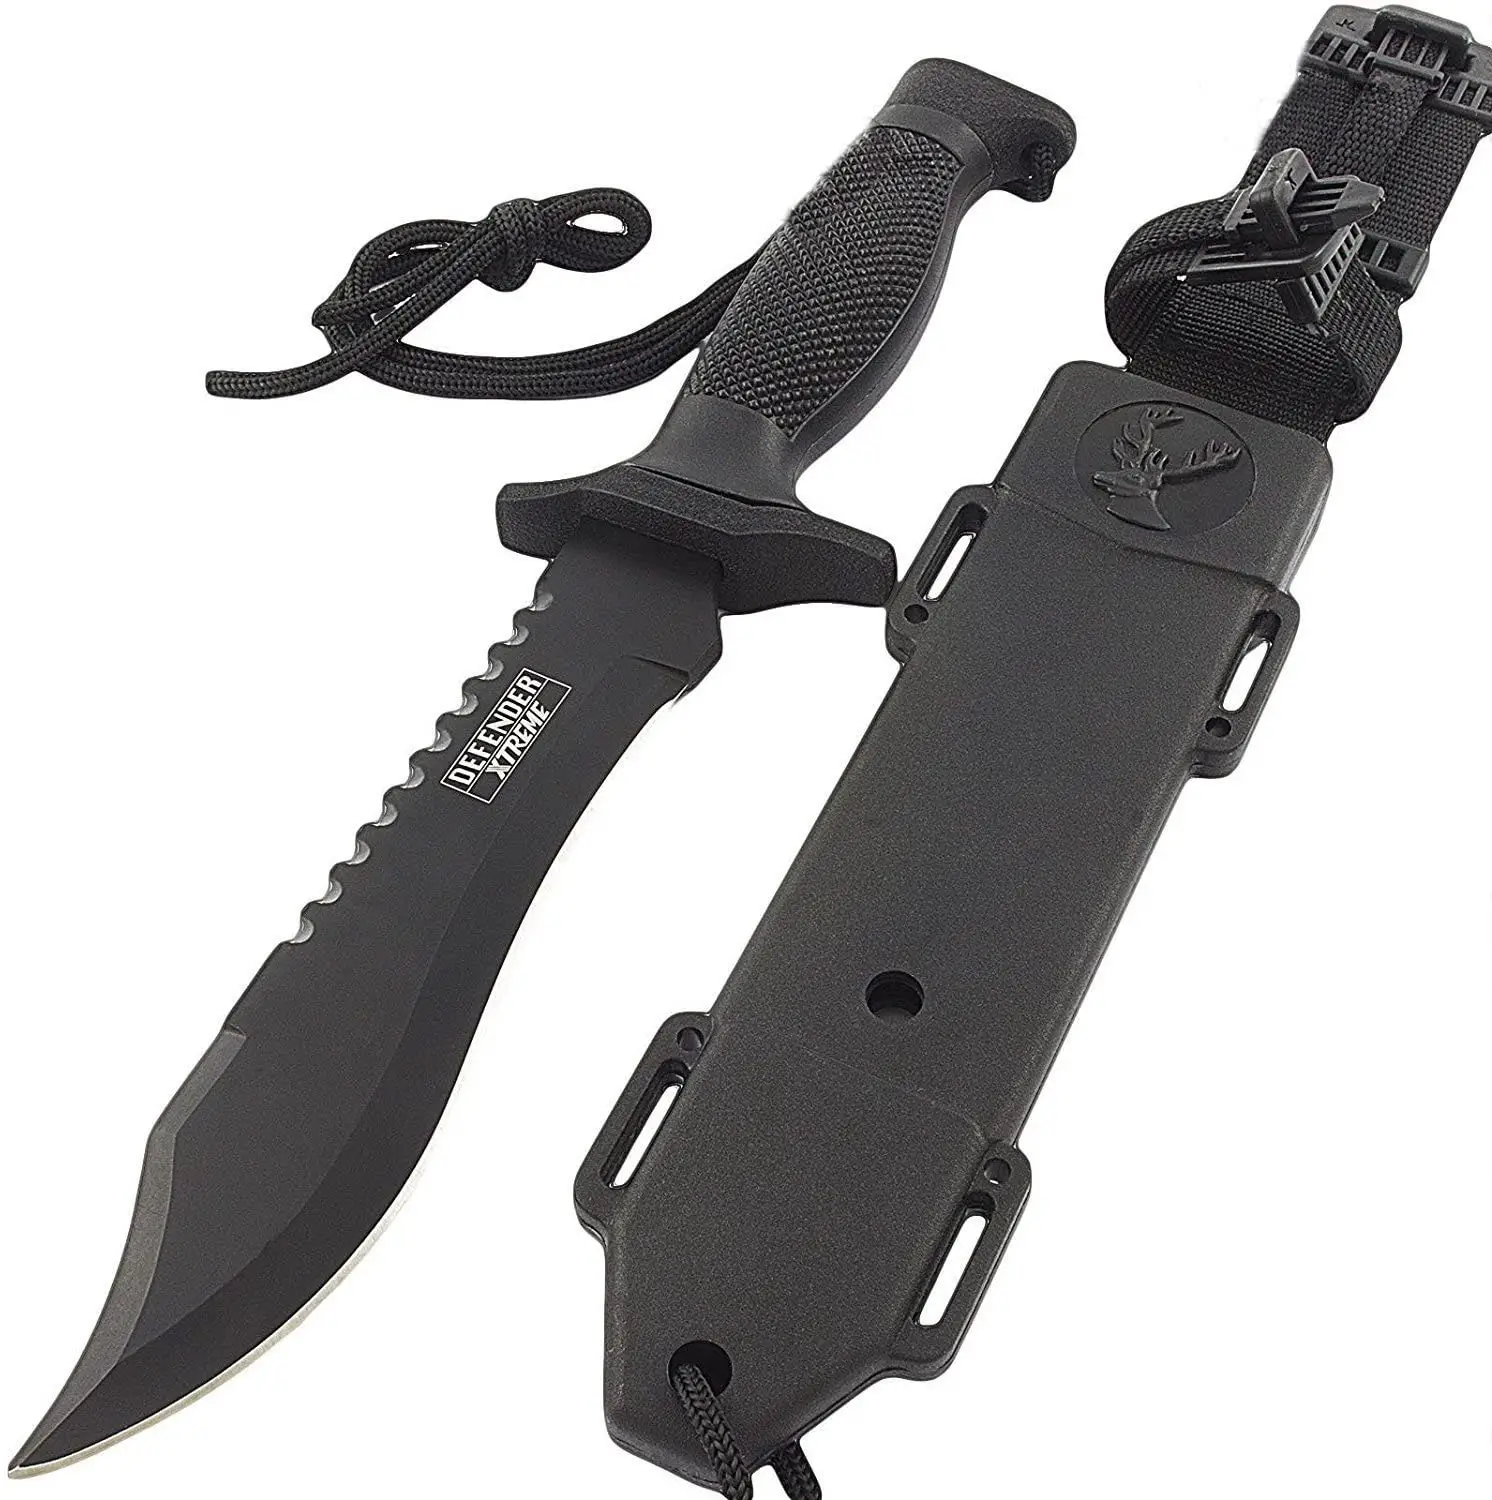 Best Hunting Knife 2022 Buying Guide 1